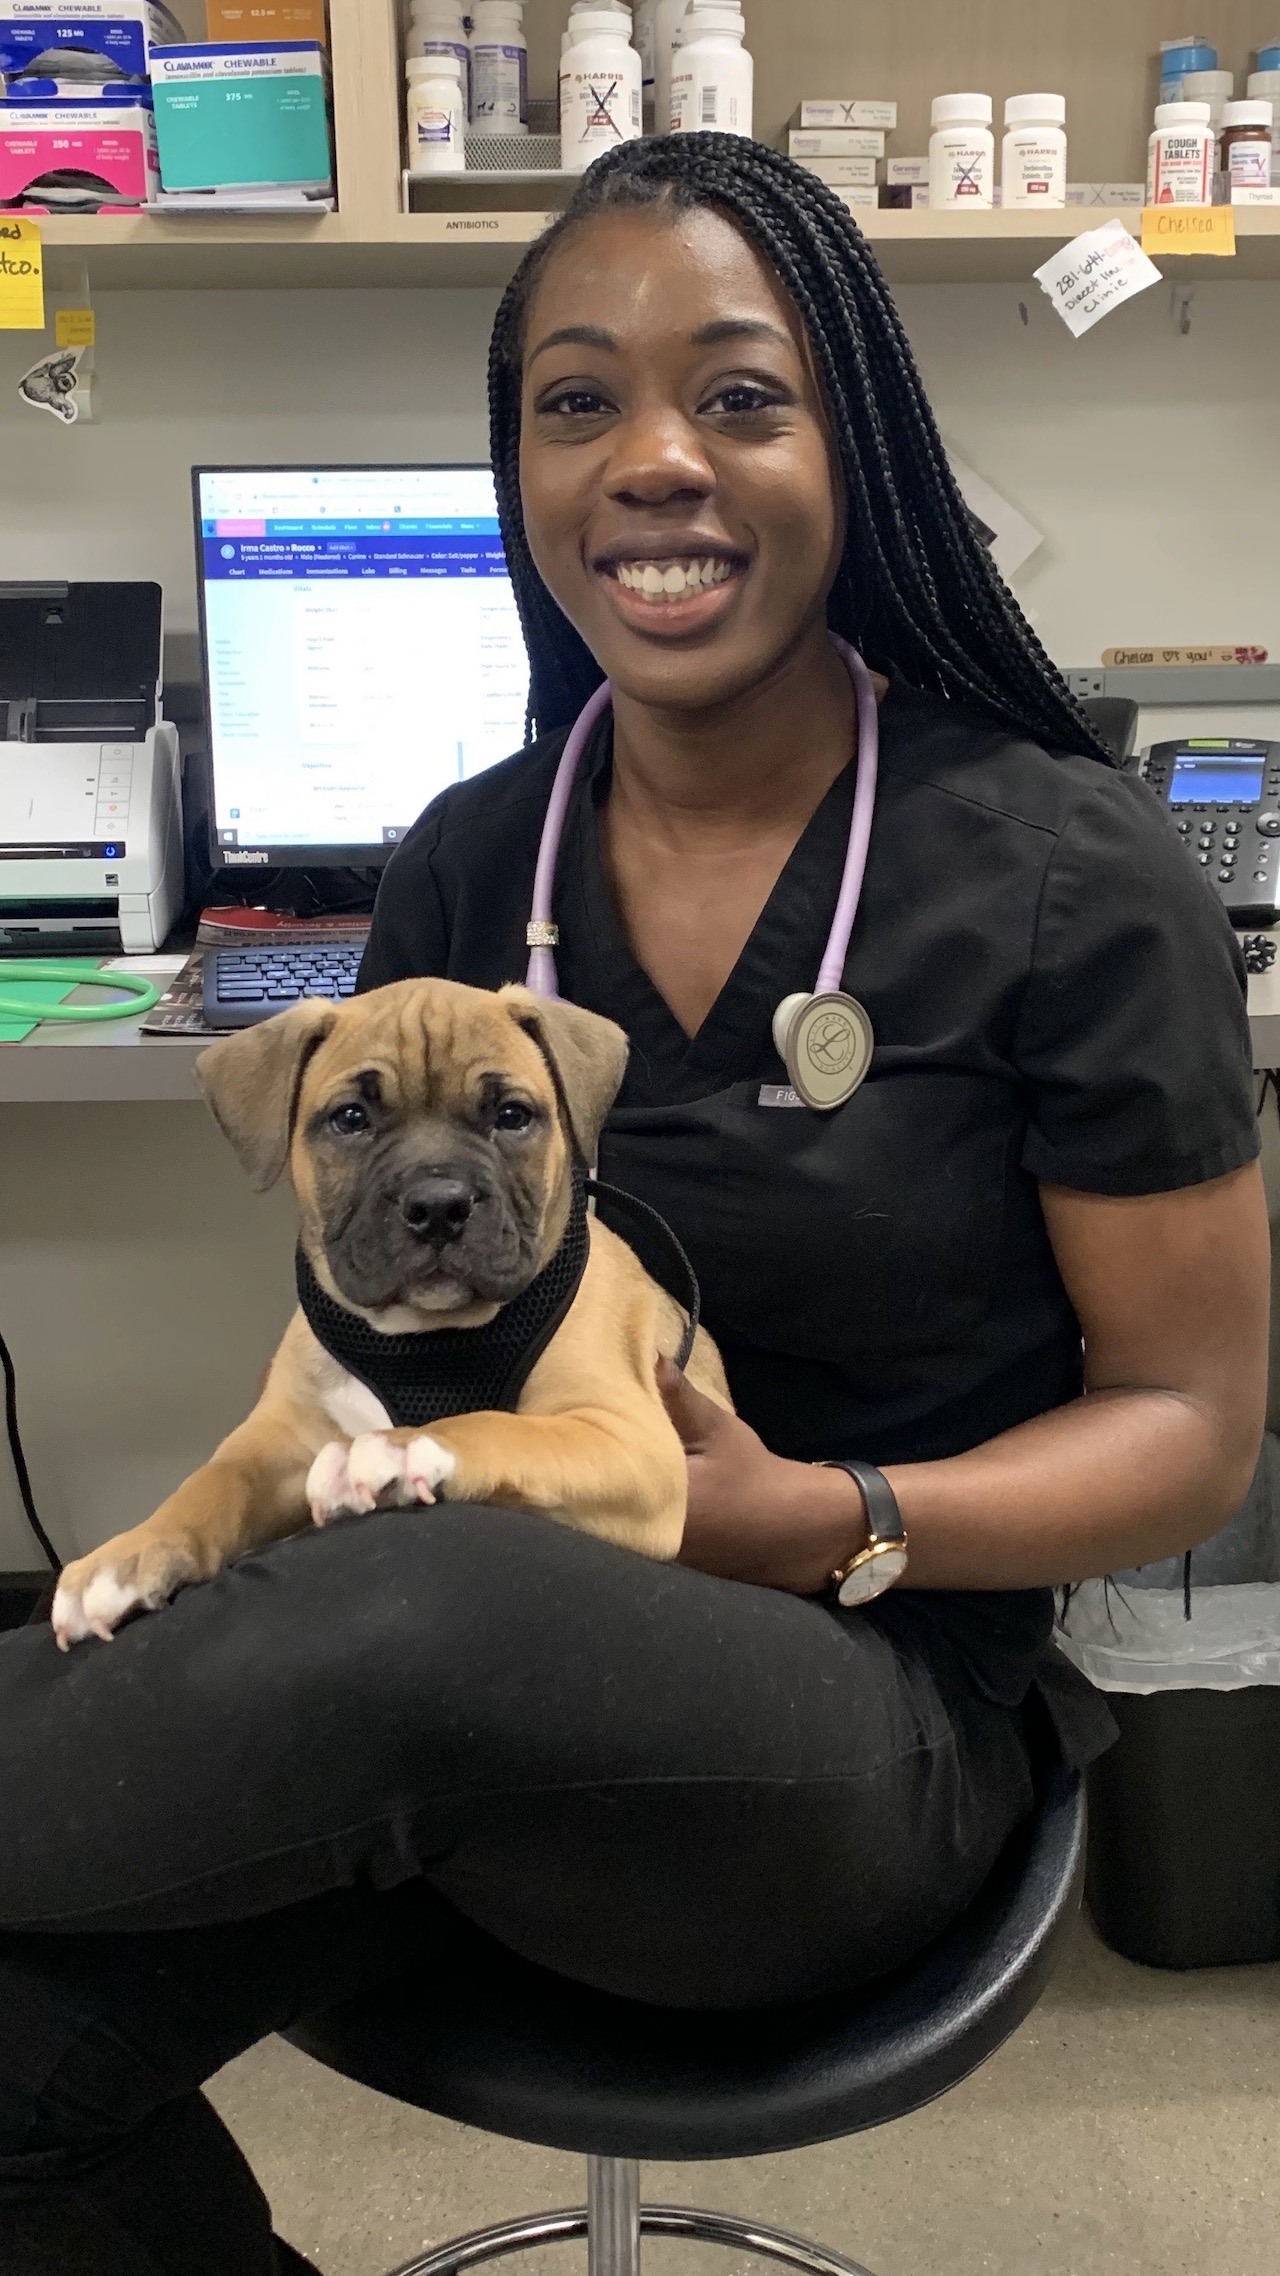 Veterinarian smiling and holding puppy in doctor's office